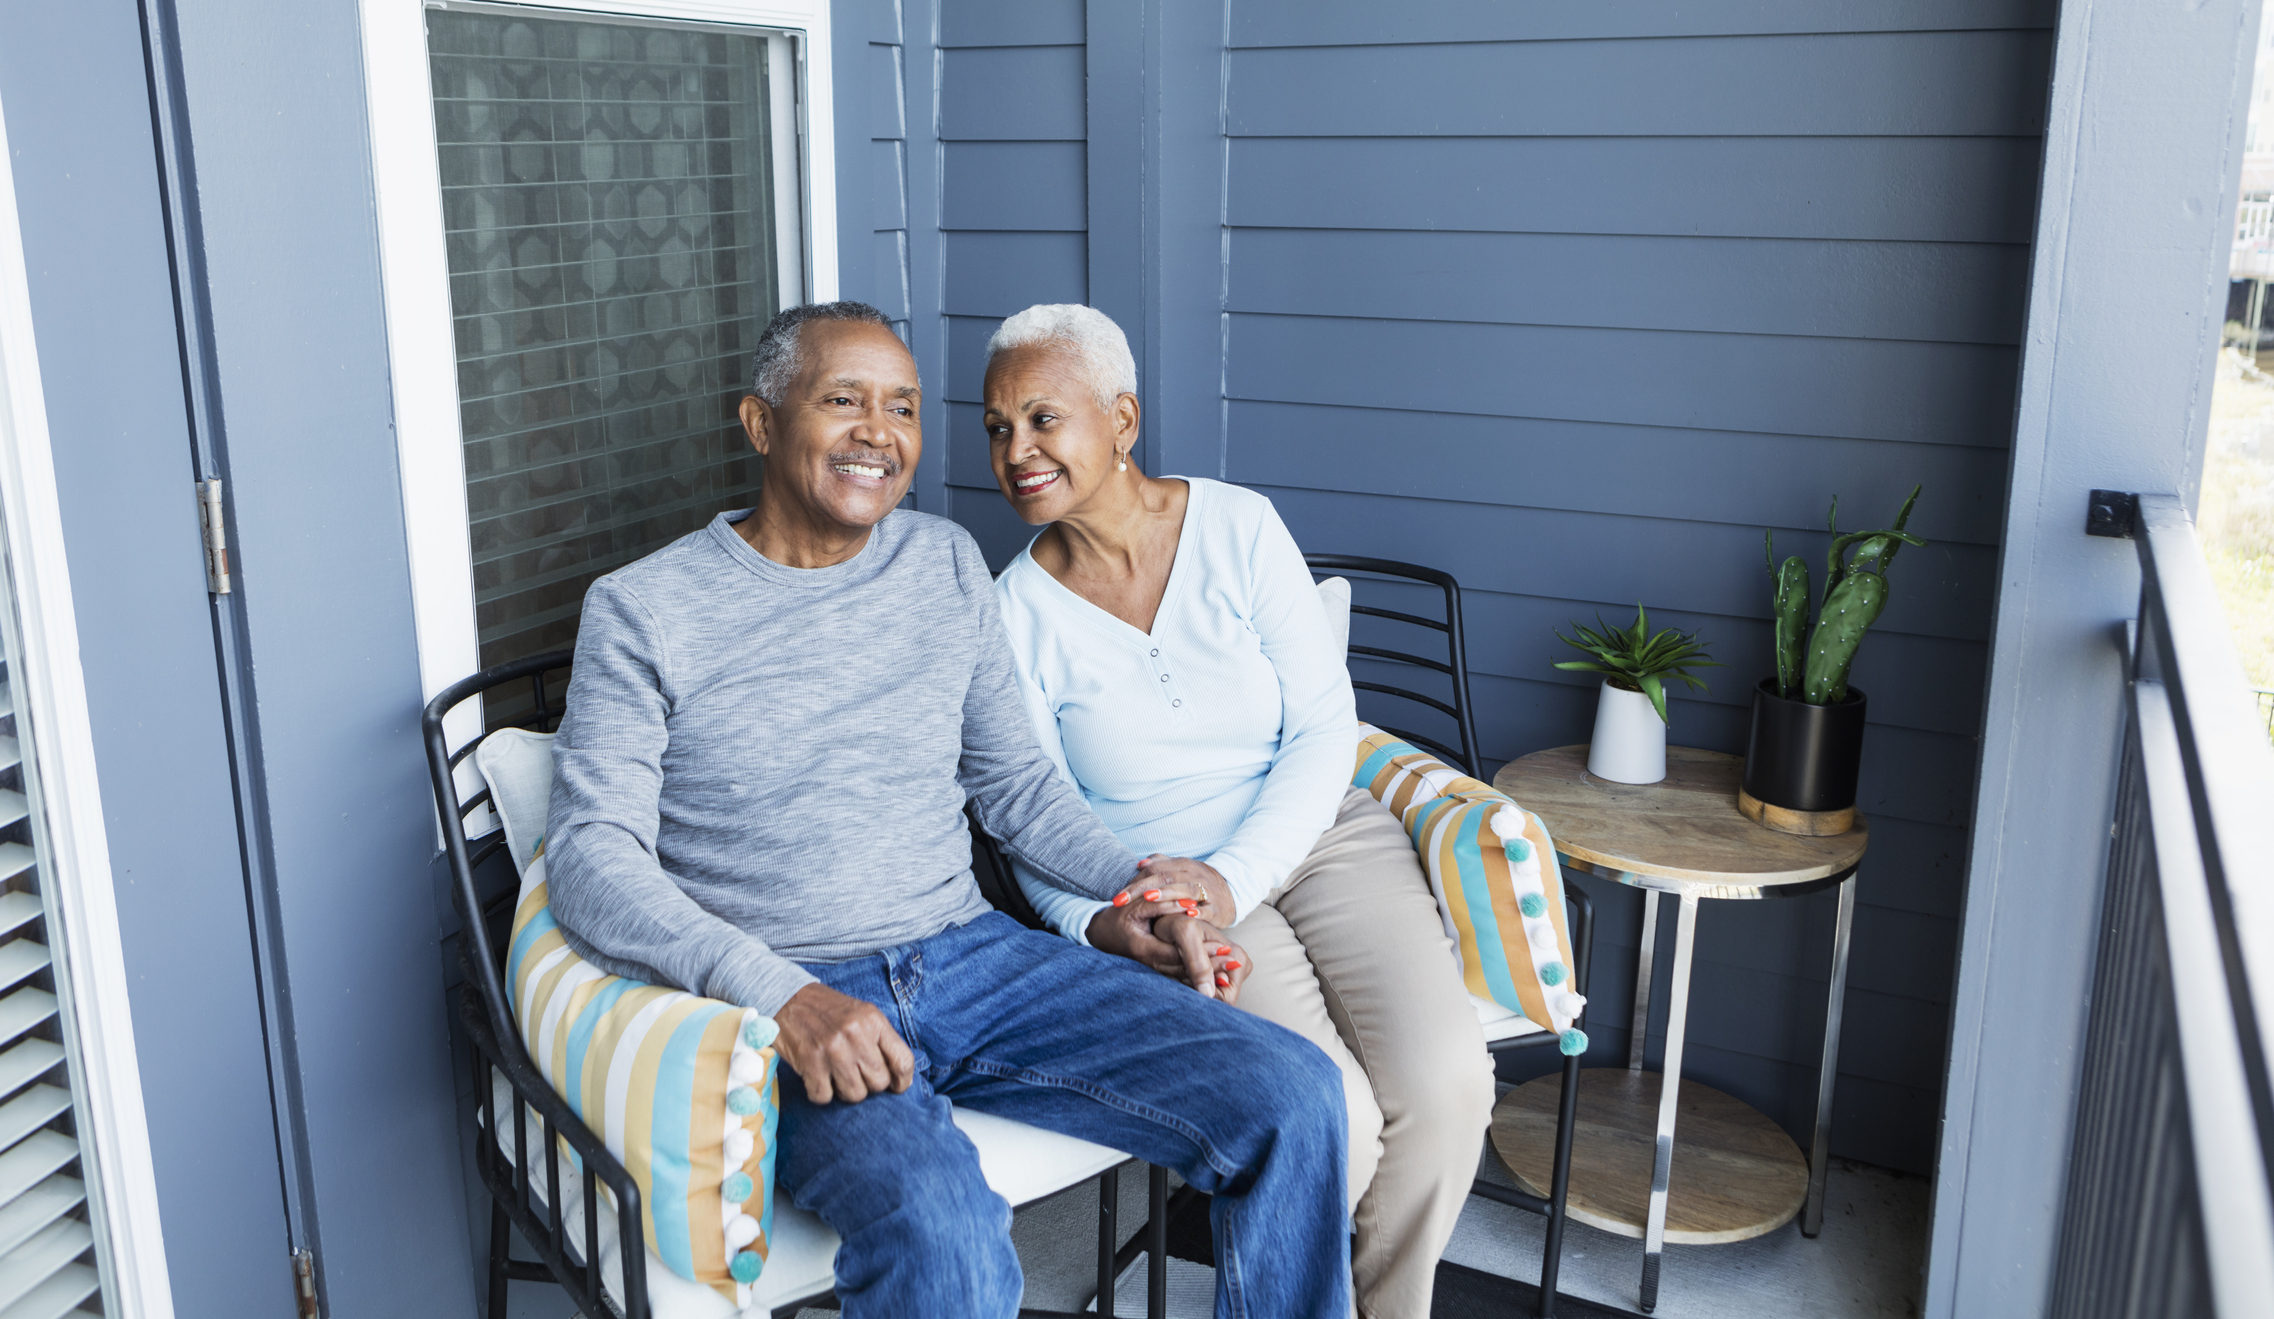 Senior couple planning to stay in their home as they age